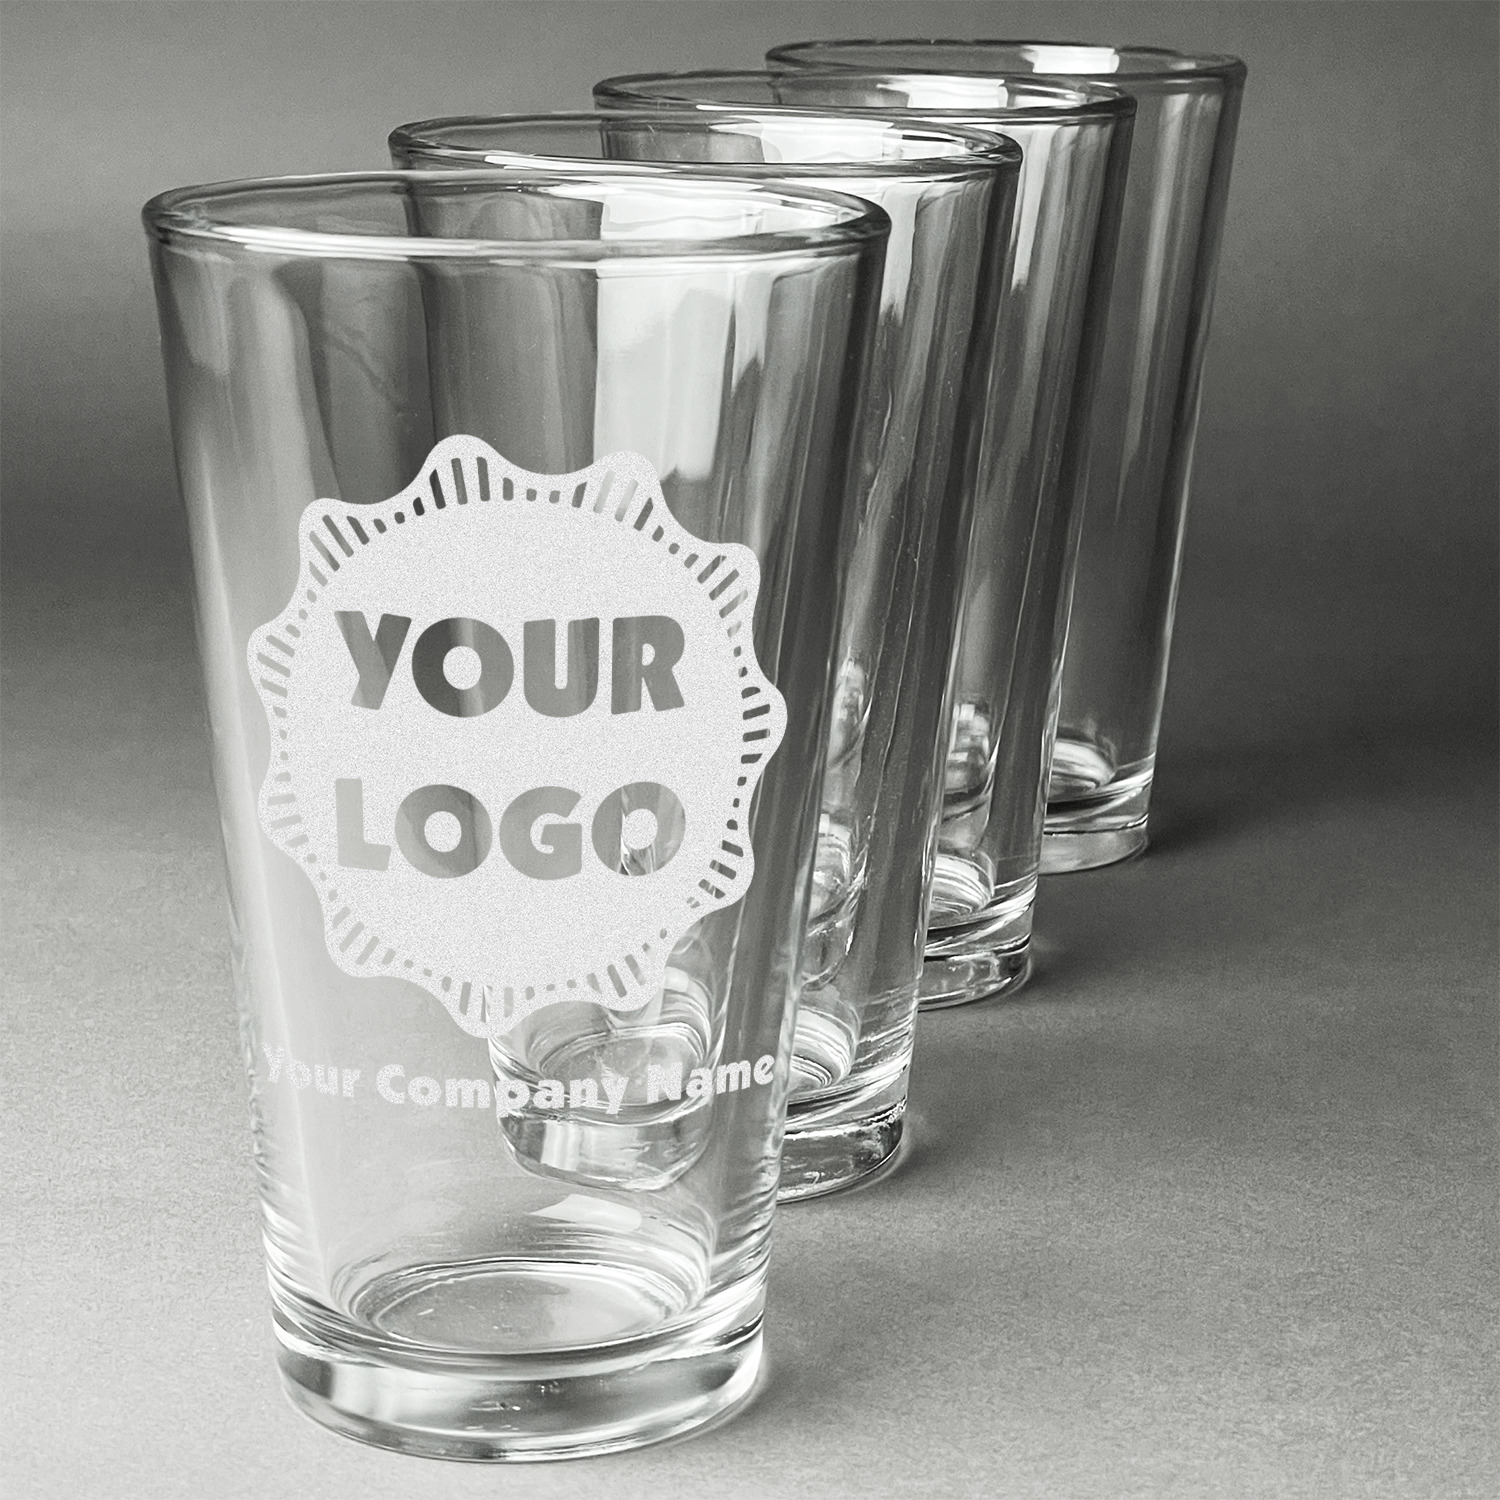 https://www.youcustomizeit.com/common/MAKE/638421/Logo-Company-Name-Set-of-Four-Personalized-Beer-Glasses.jpg?lm=1686953152